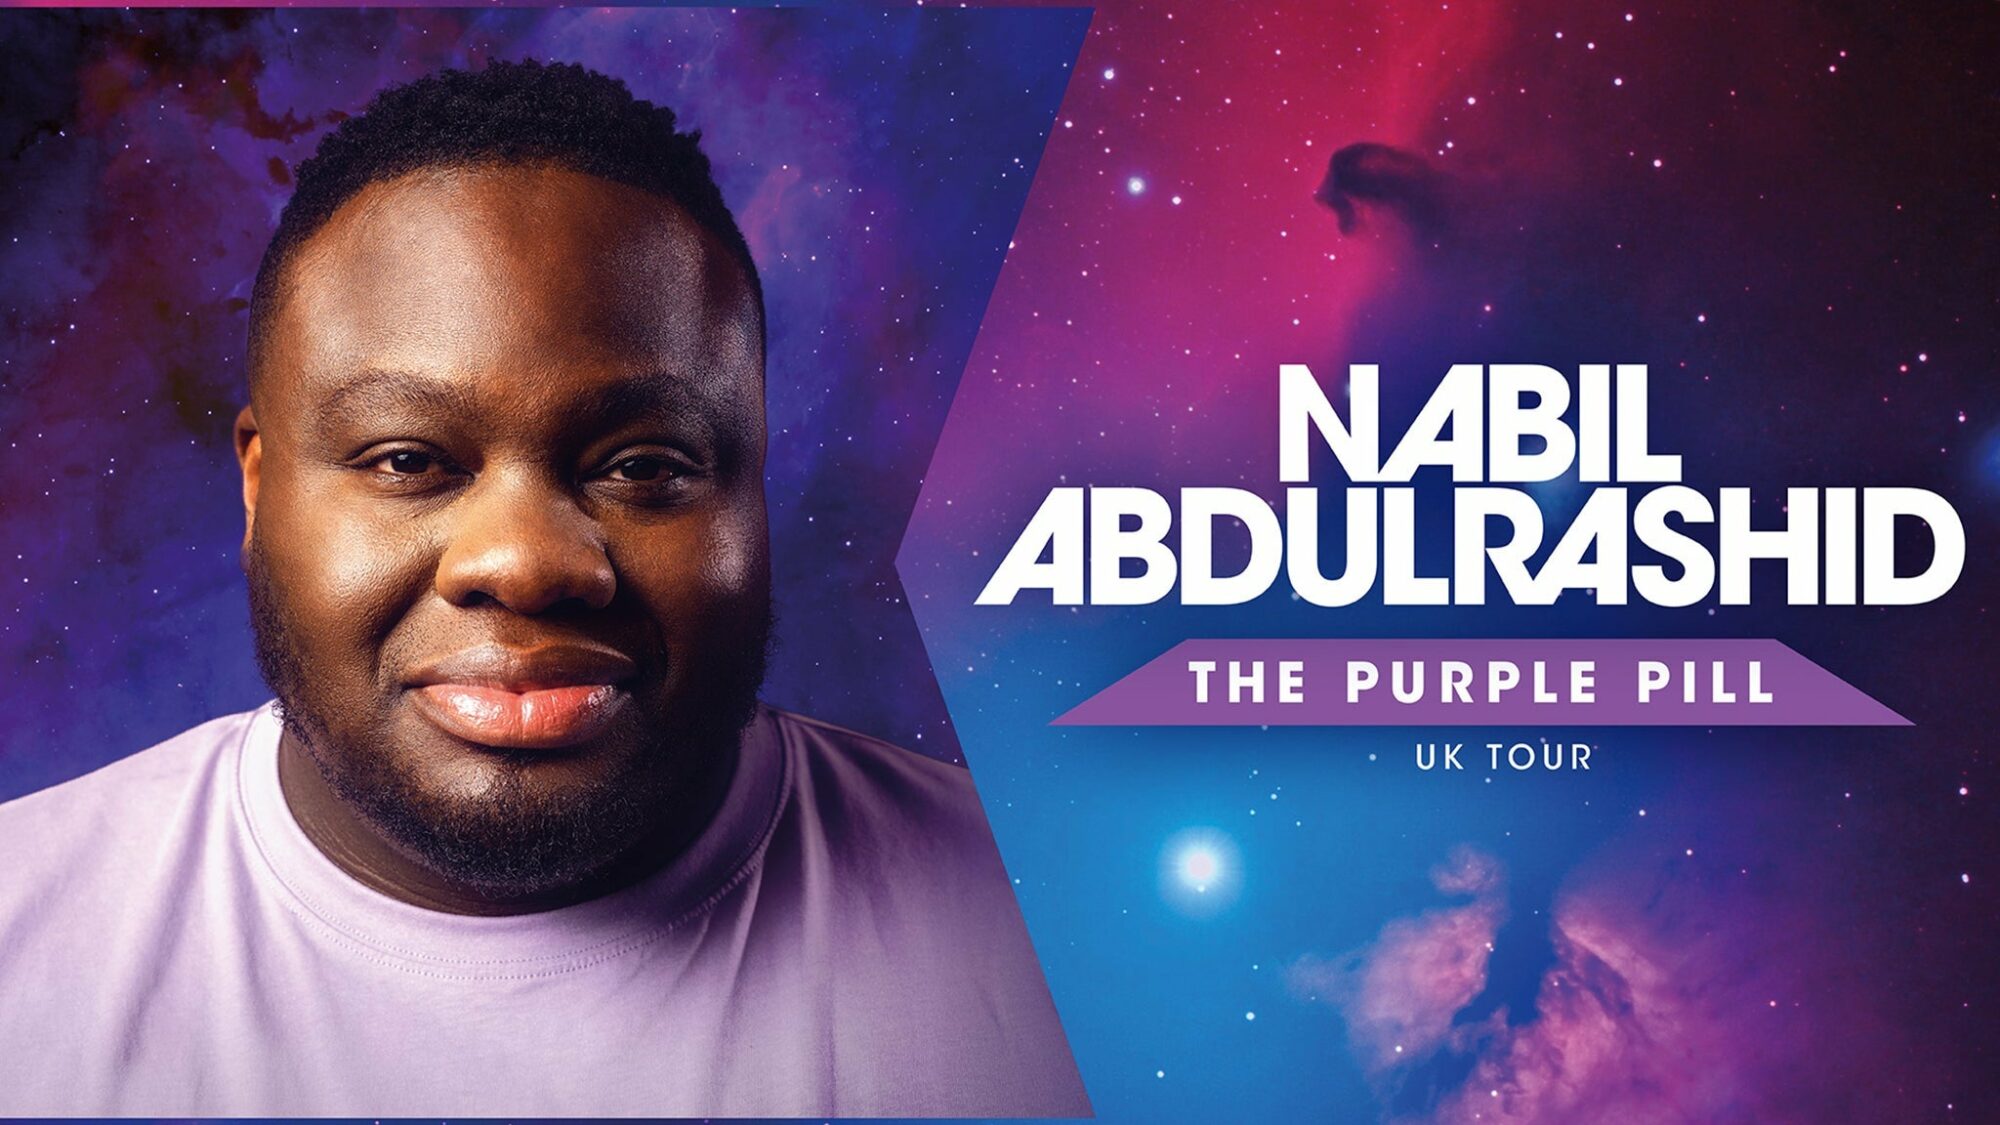 Image name Nabil Abdulrashid the Purple Pill at THE STUDIO BRADFORD Yorkshire the 26 image from the post Nabil Abdulrashid: the Purple Pill at Wardrobe, Leeds in Yorkshire.com.